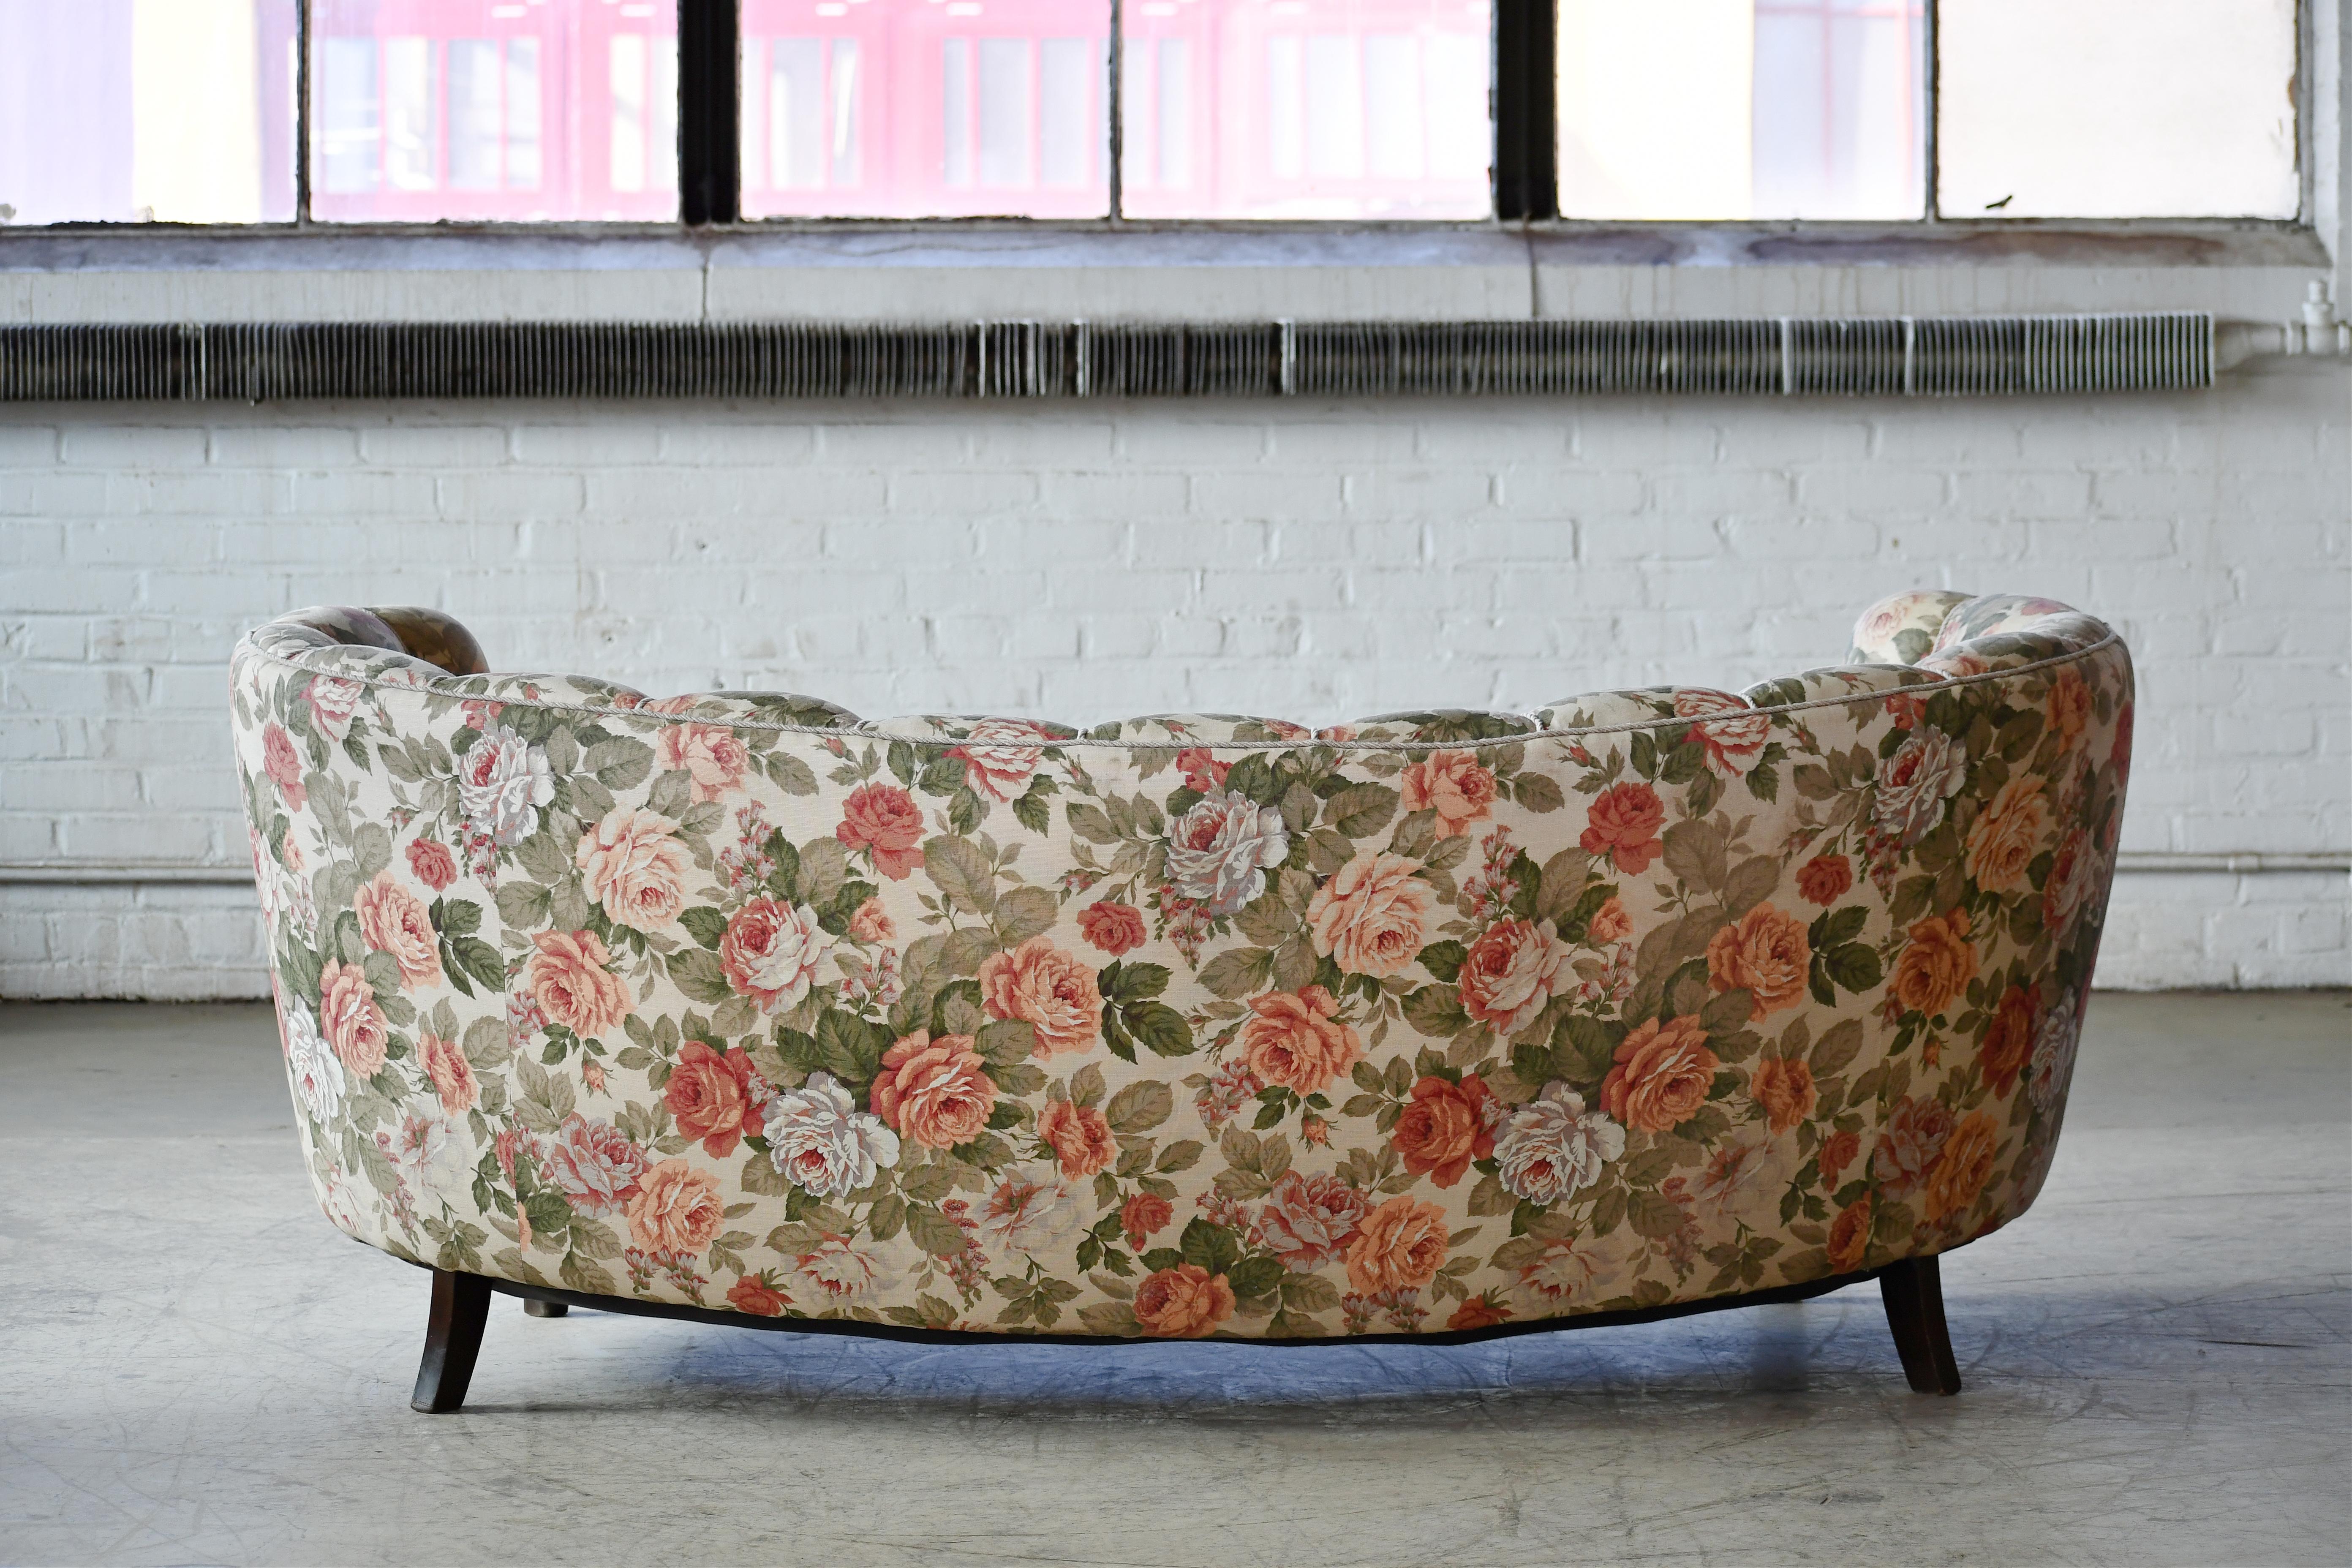 Danish 1940s Large Banana Form Curved Sofa in Floral Fabric In Good Condition For Sale In Bridgeport, CT